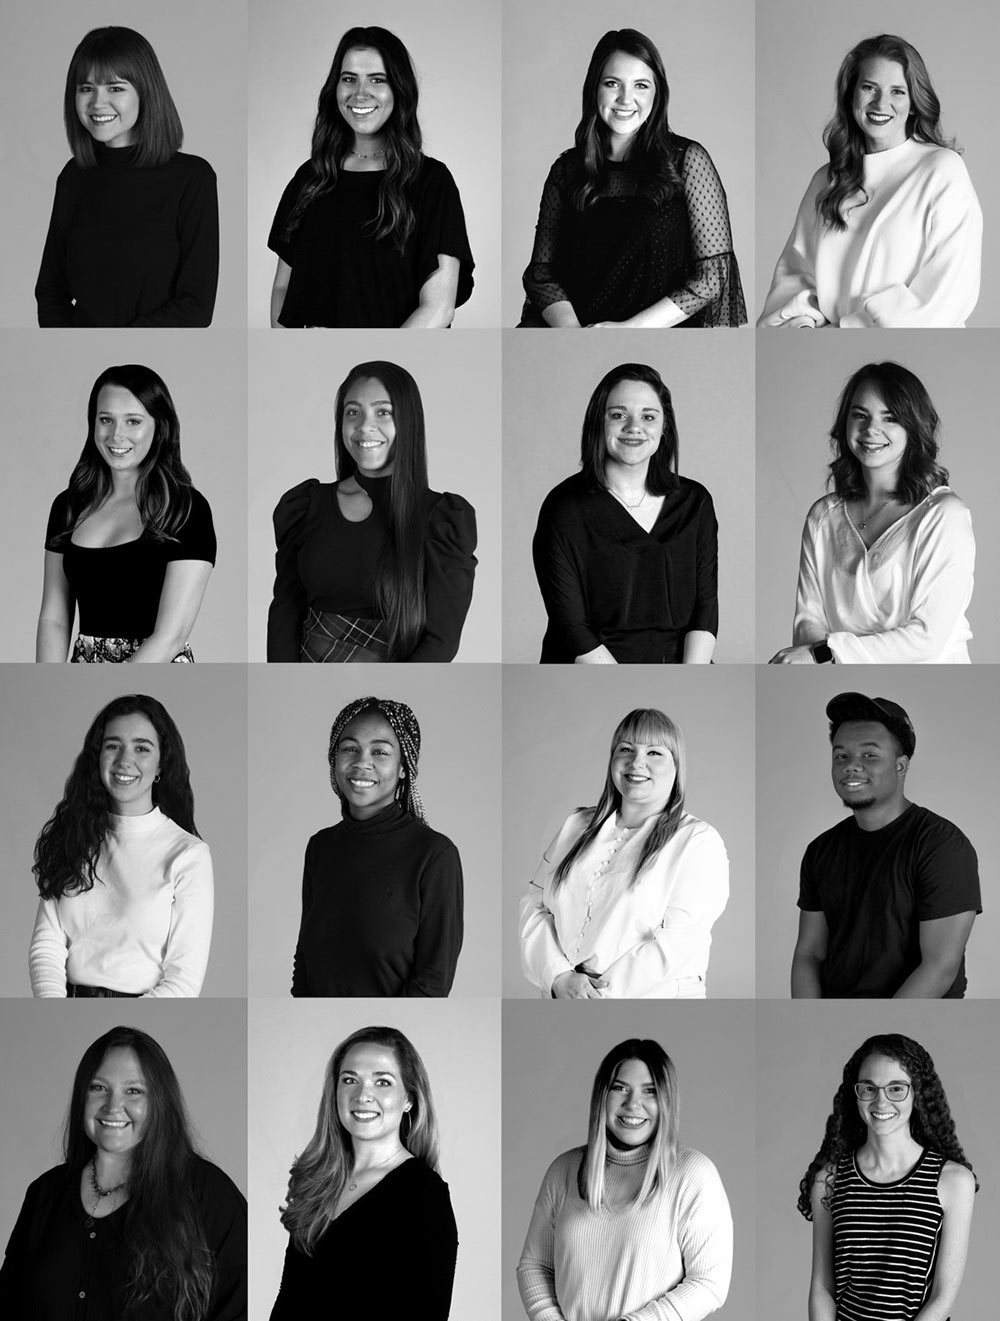 grid of 16 black and white headshots (4 rows of 4) (top row, l-r) Hannah Battey of Brandon; Lexi Bennett of Columbus; Carson Brantley of Pontotoc; Katie Corey of Shreveport, Louisiana; (second row, l-r) Amelia Dalton of Meridian; Tatiana Flores of Houston, Texas; Lindsey Anne Harper of Starkville; Rosalind Hutton of Tchula; (third row, l-r) Laura Jones of Laurel; Amber Mabry of Ridgeland; Suzy Marshall of Smithville; Ques Nevels of Olive Branch; (bottom row, l-r) Mary Hannah Ruff of Hattiesburg; Mimi Abbott Sheppard of Greenwood; Lilah Smith of Florence; and Julia Thompson of Starkville. 